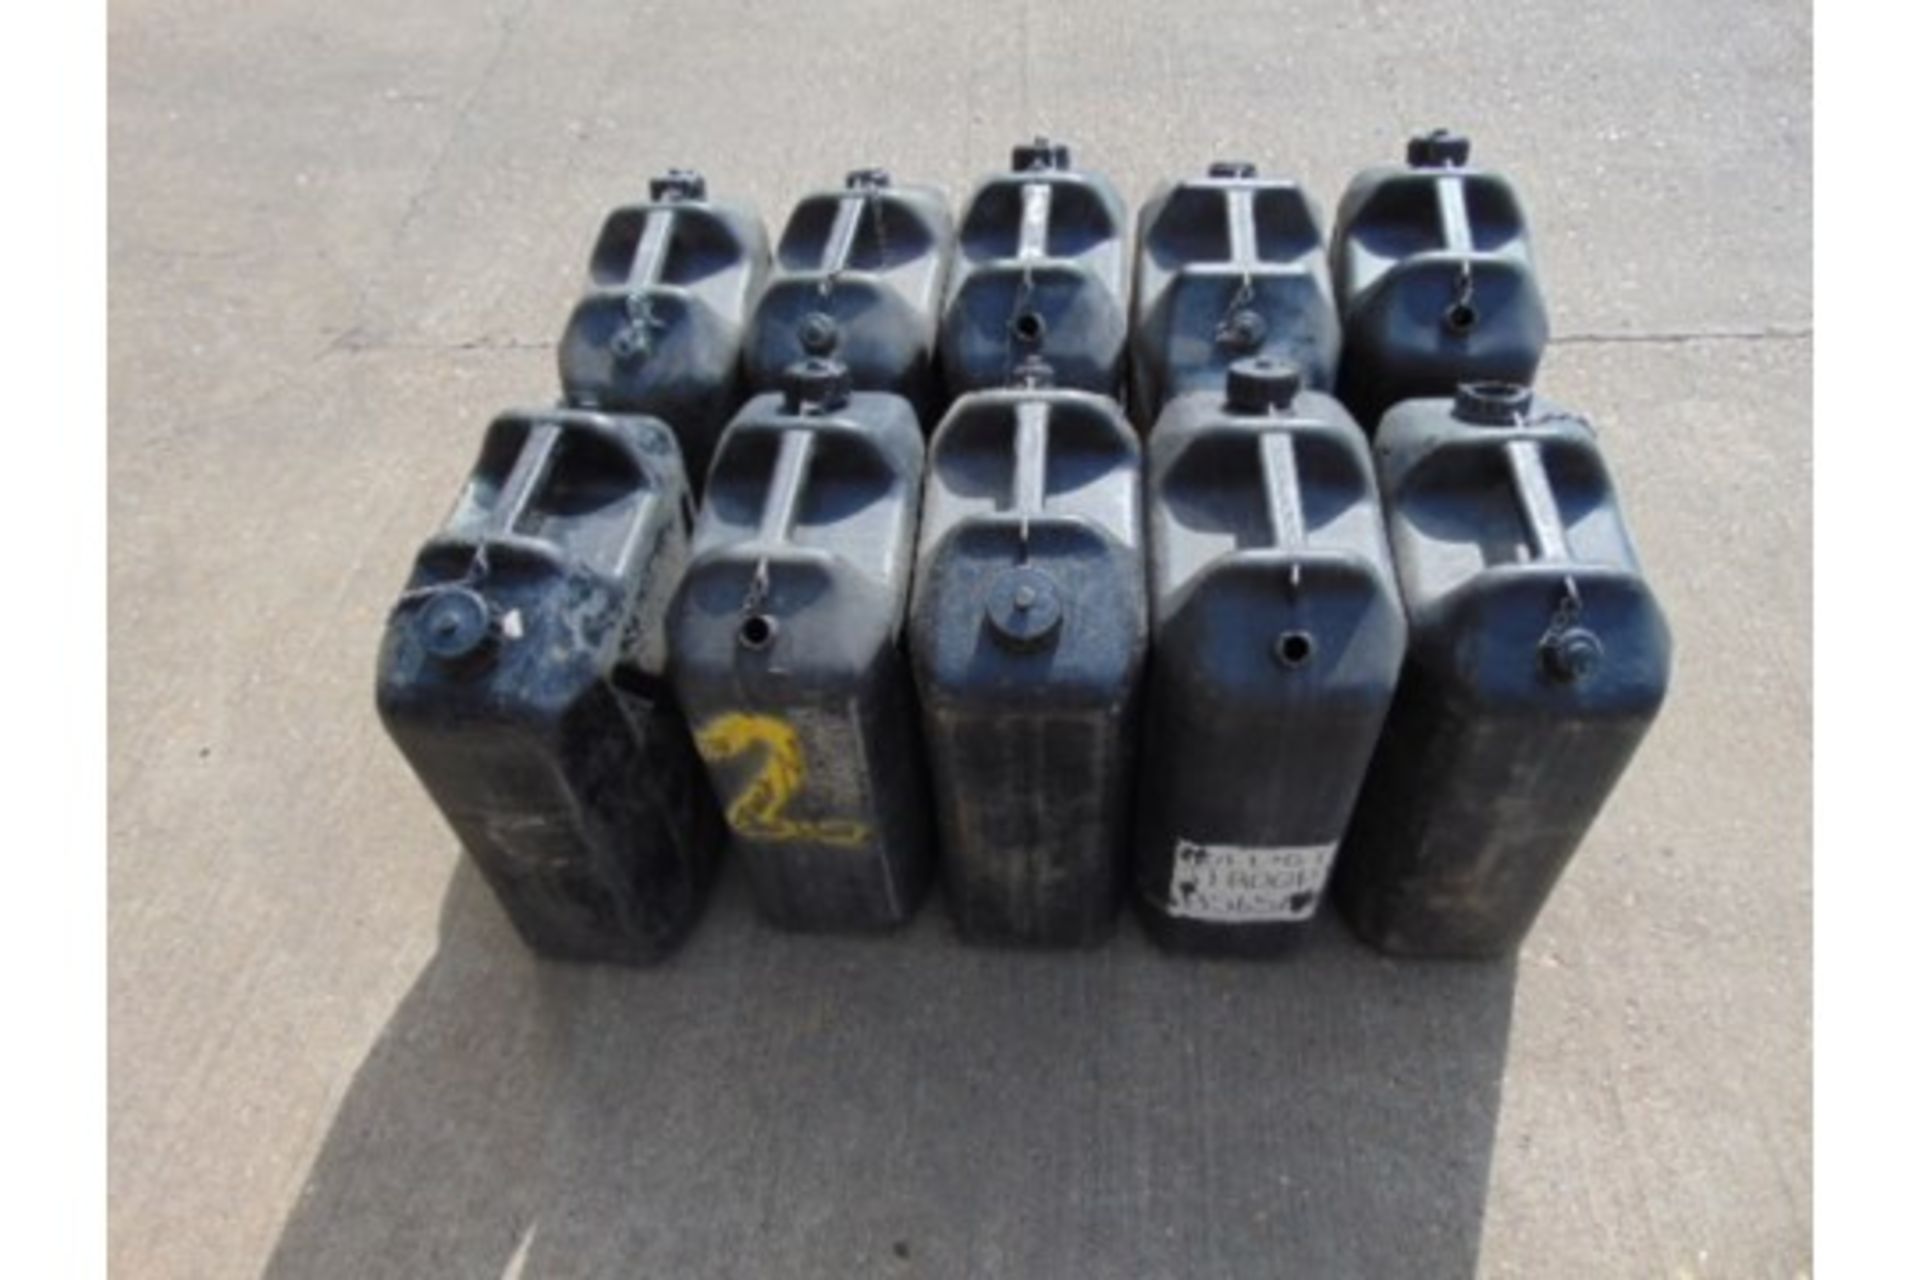 10 x Issued Water Containers - Bild 5 aus 5